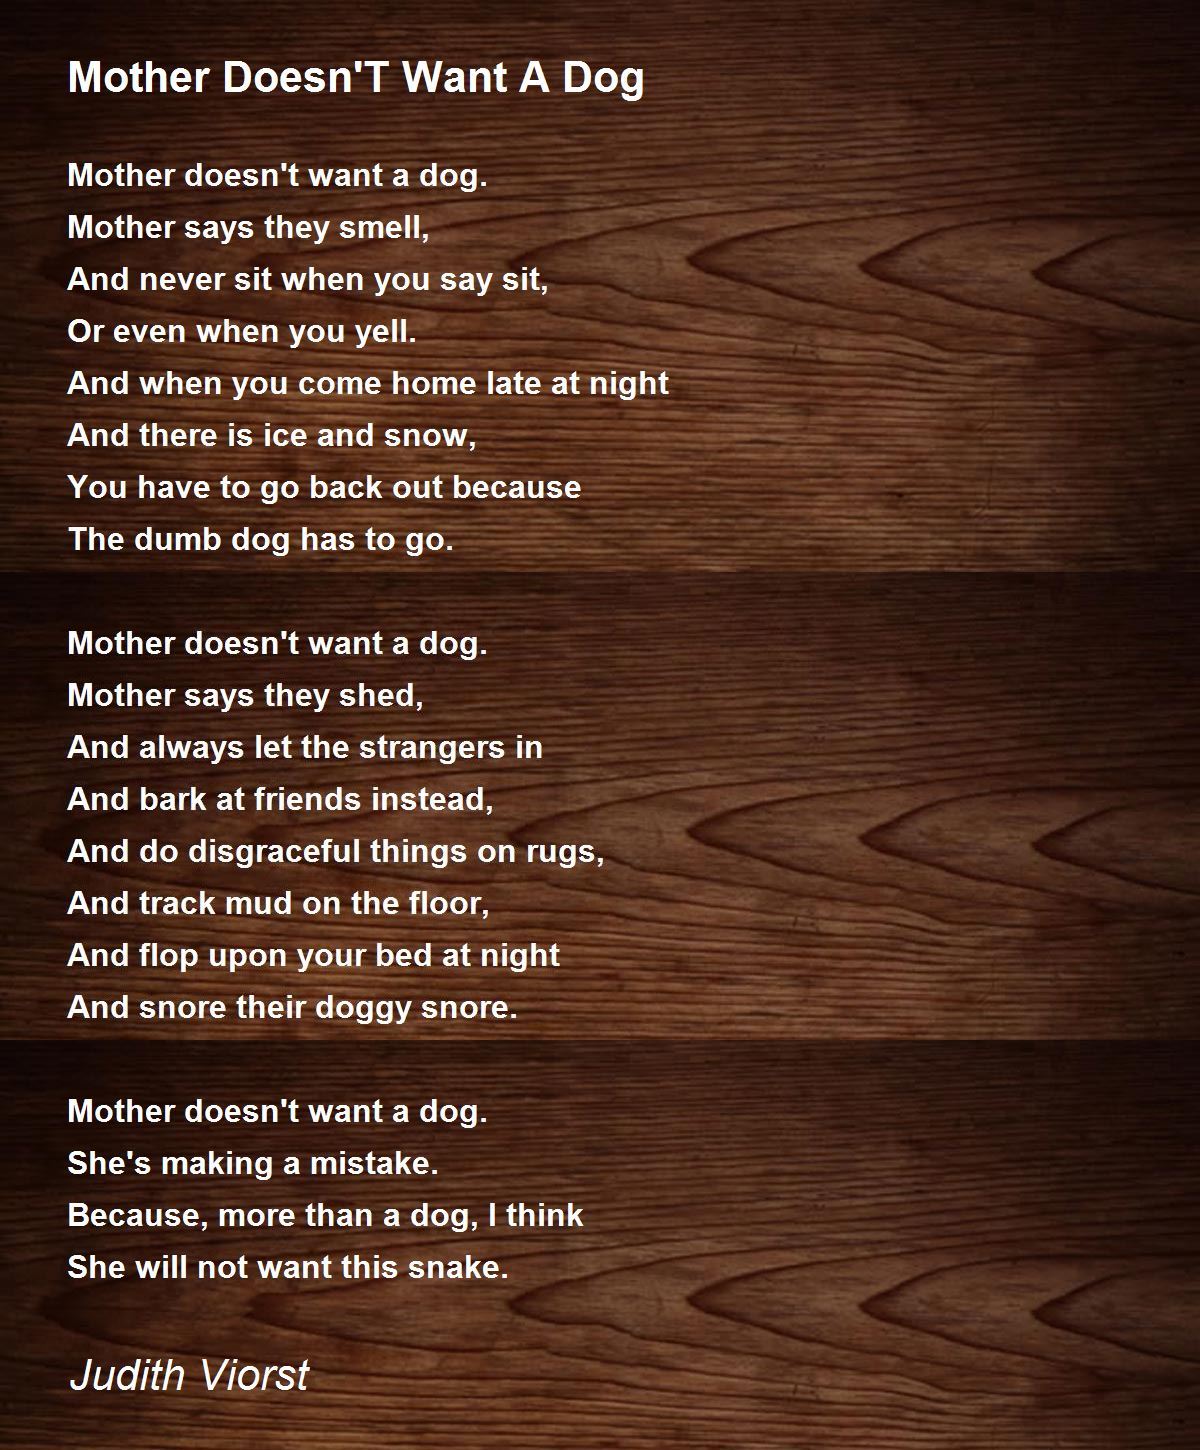 Mother Doesn'T Want A Dog Poem by Judith Viorst - Poem Hunter